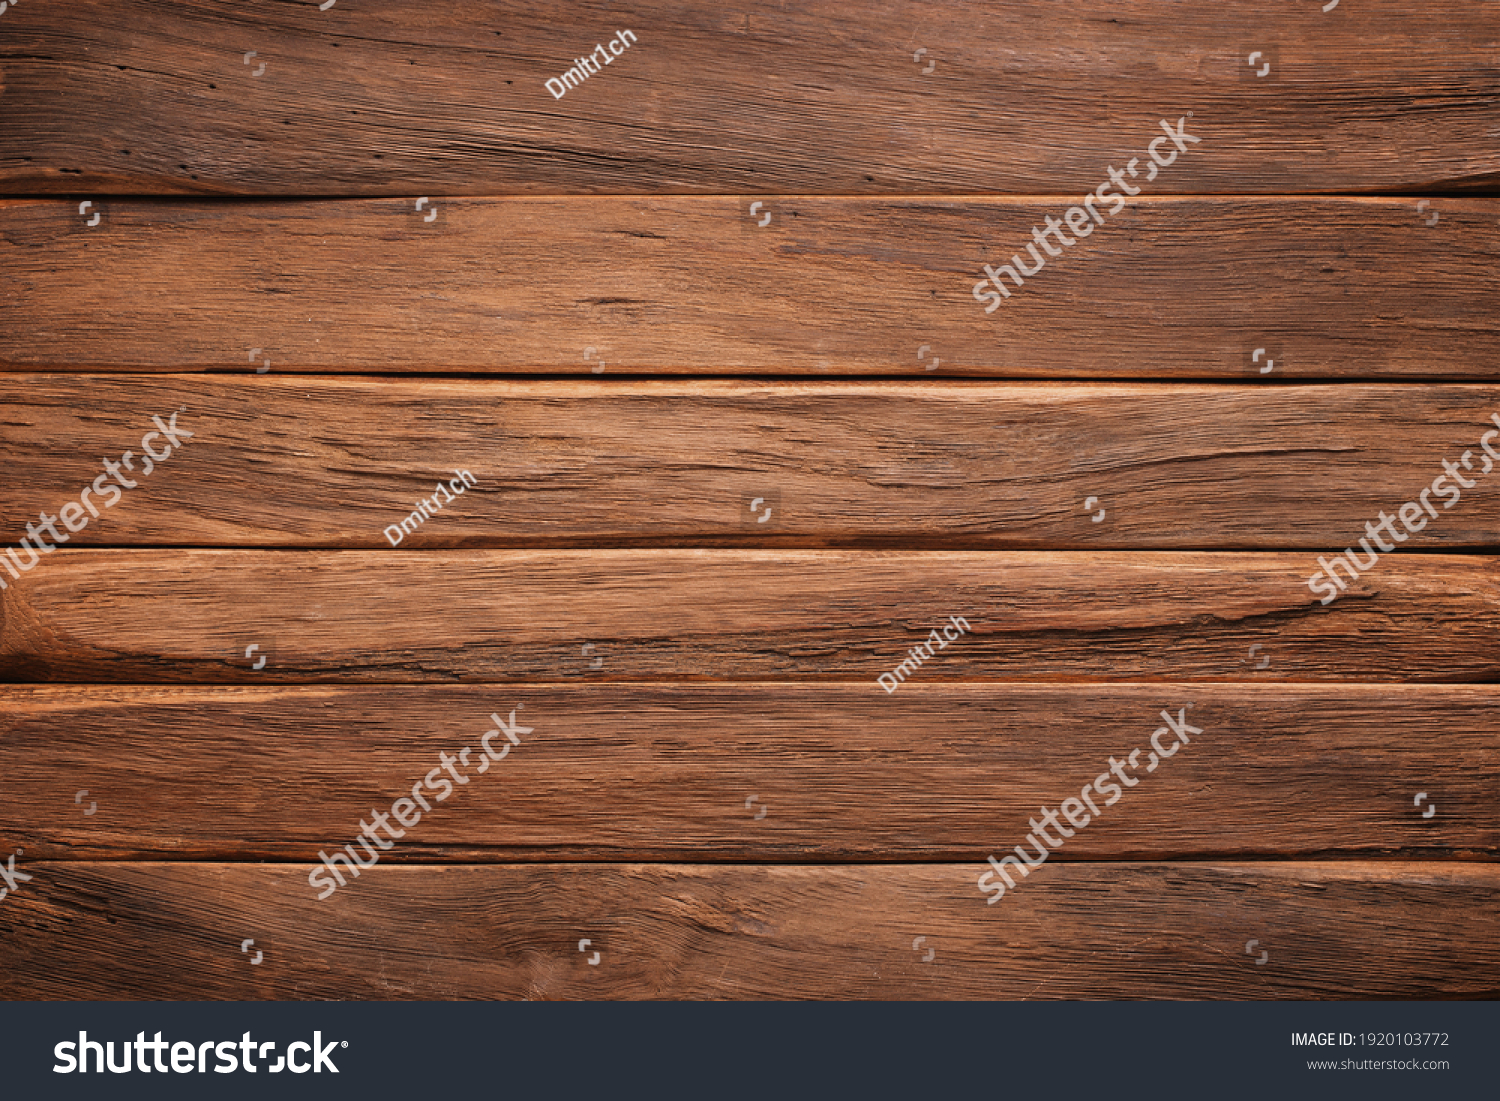 wooden table texture. brown planks as background #1920103772